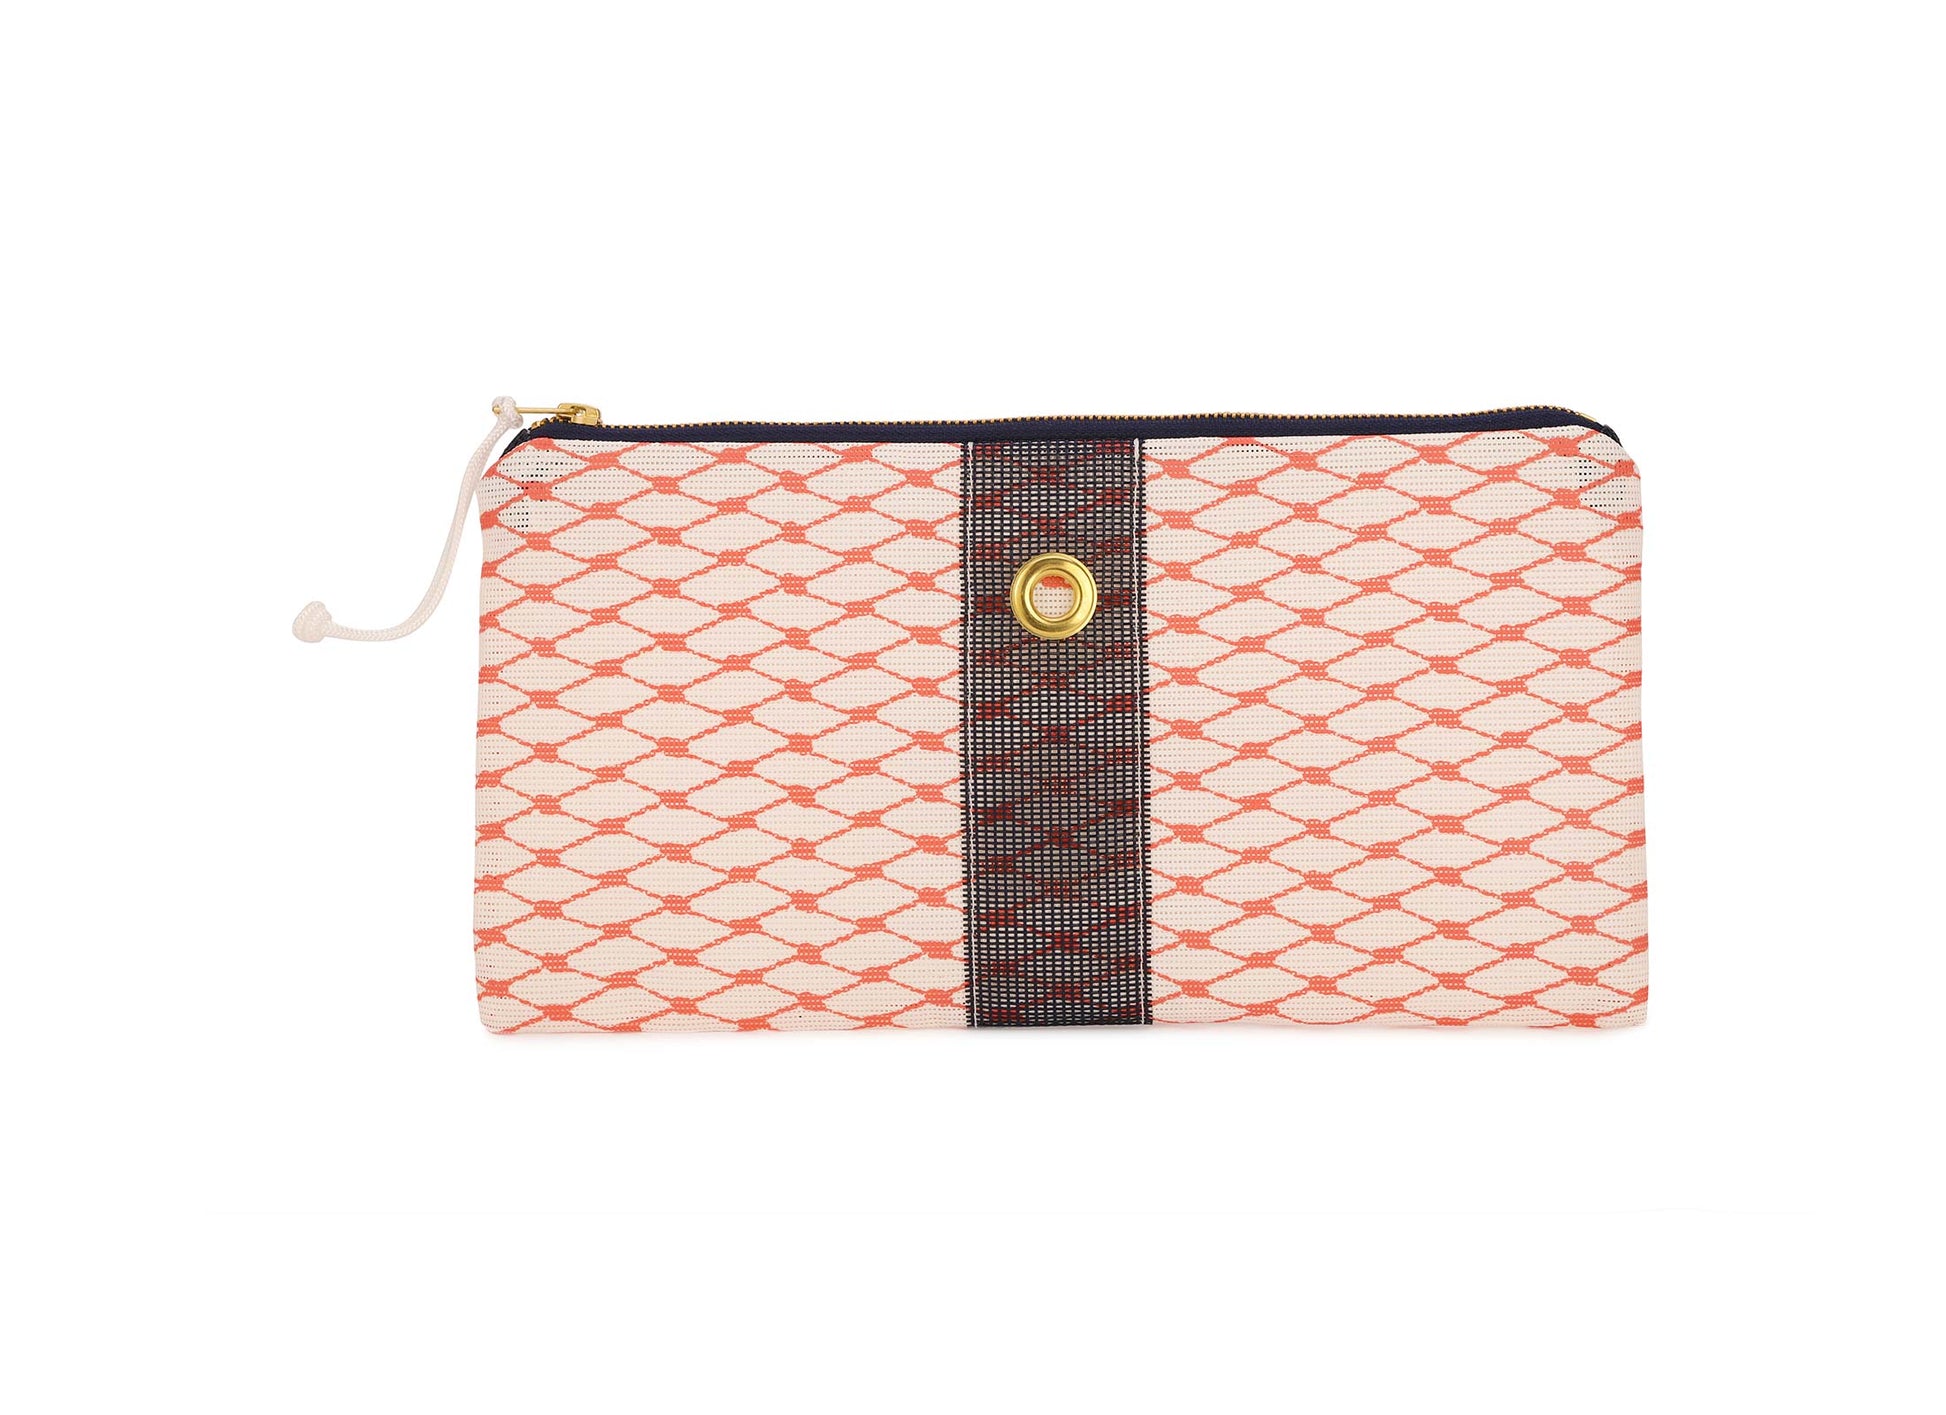 Lobster Bisque Clutch: Maine Made & Handmade Clutch Bags for Women ...